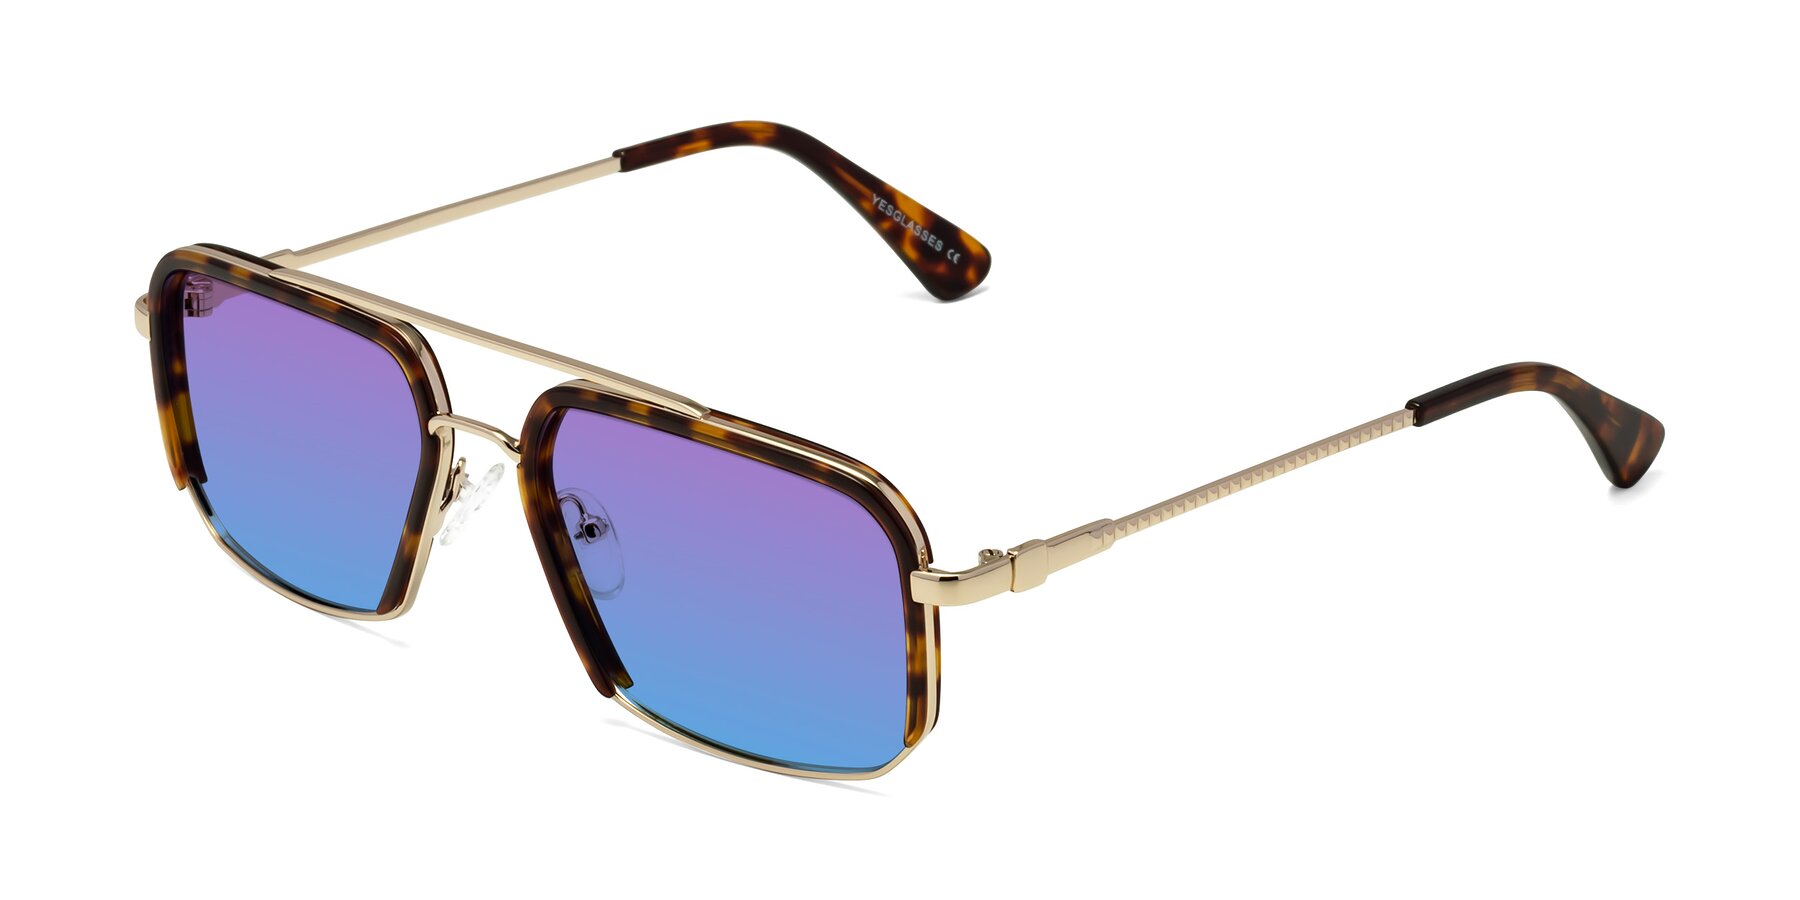 Angle of Dechter in Tortoise-Gold with Purple / Blue Gradient Lenses